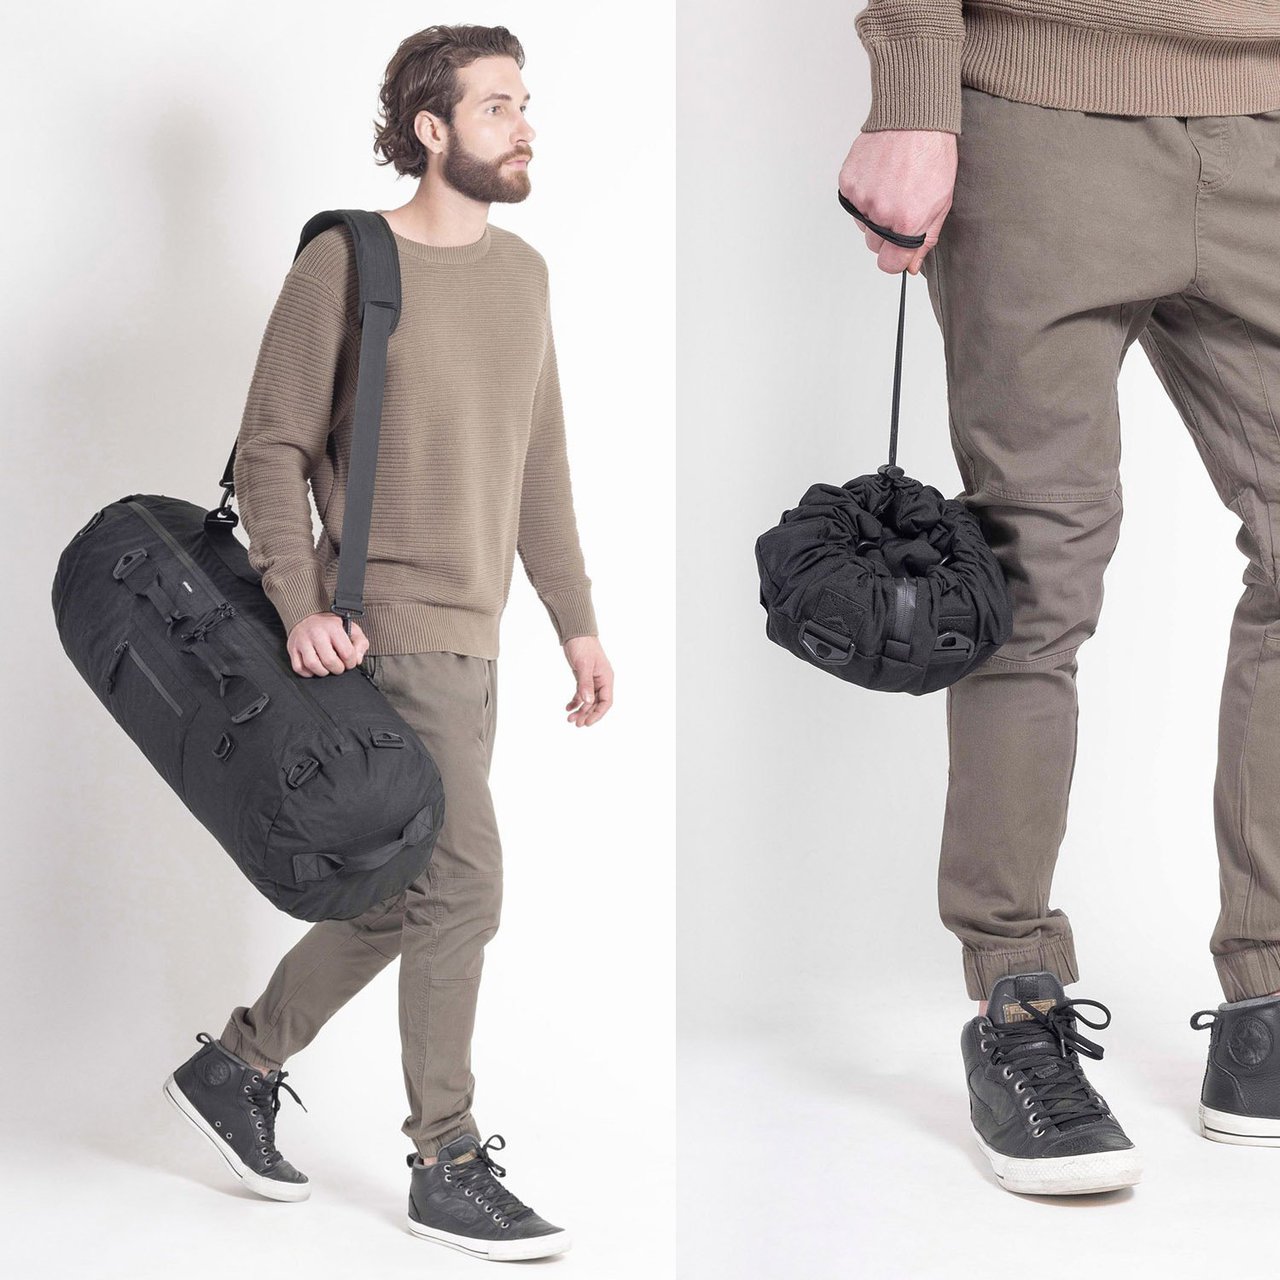 The Adjustable Bag by Piorama